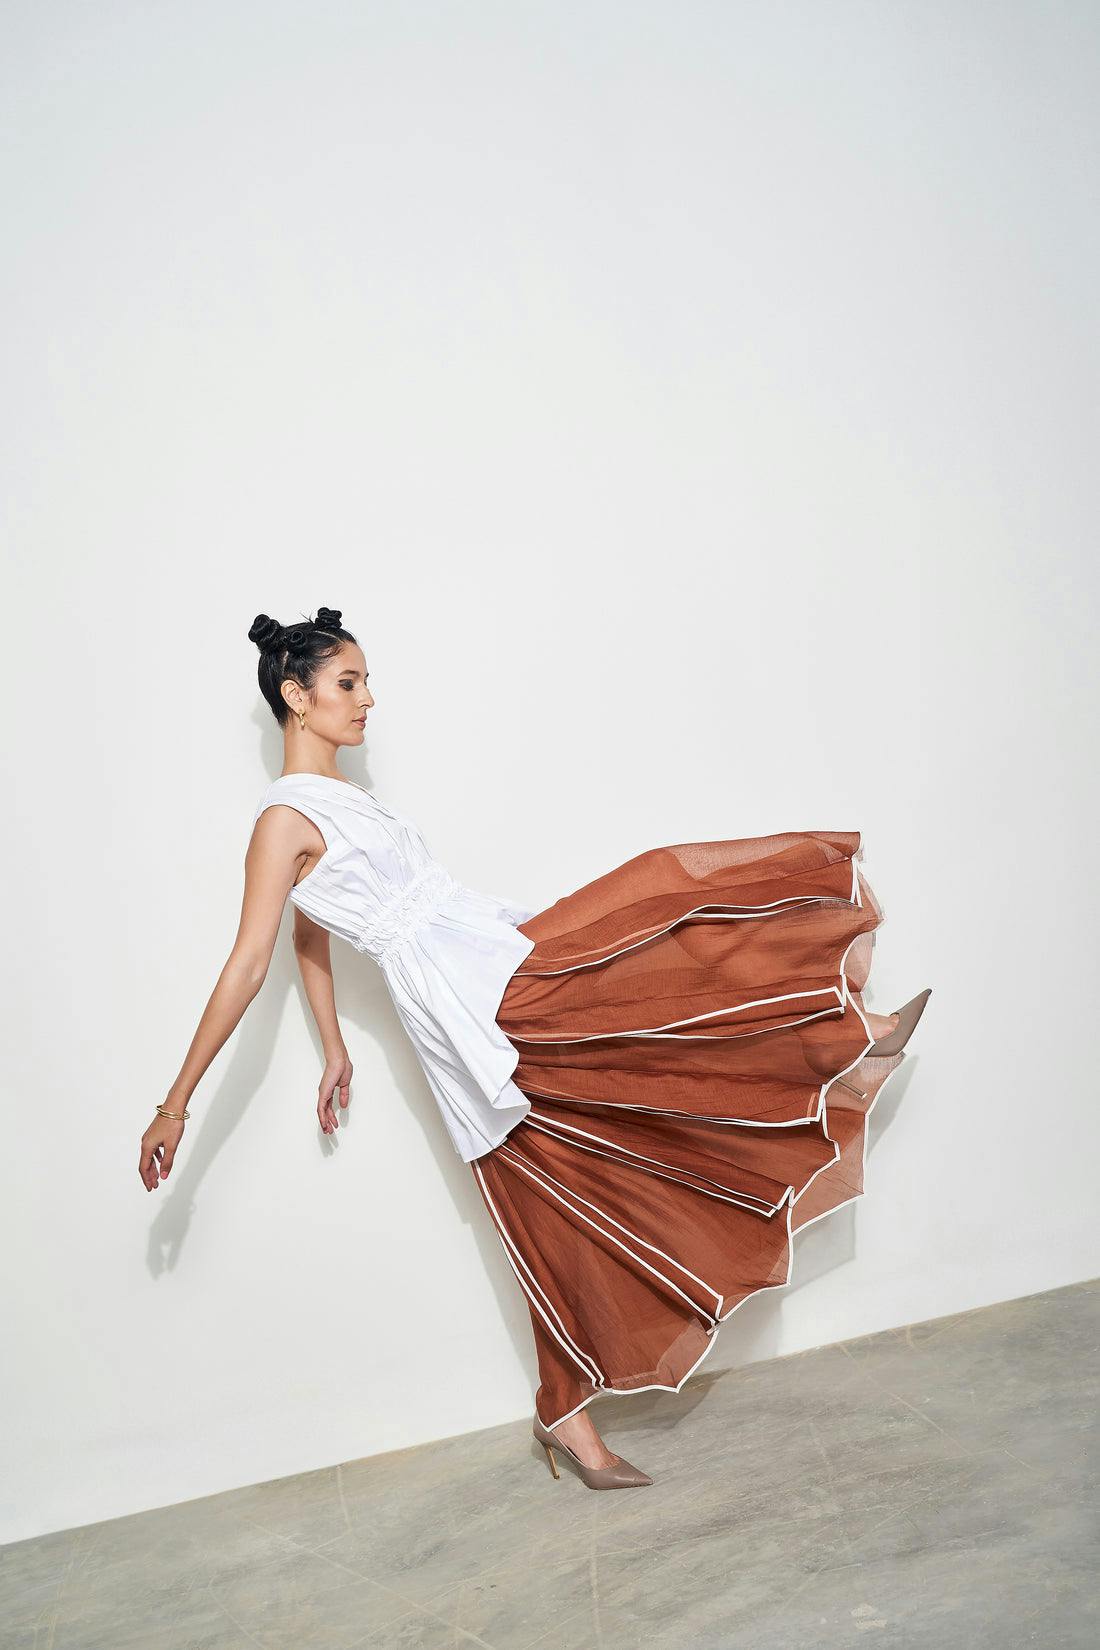 Panelled Skirt, a product by Corpora Studio